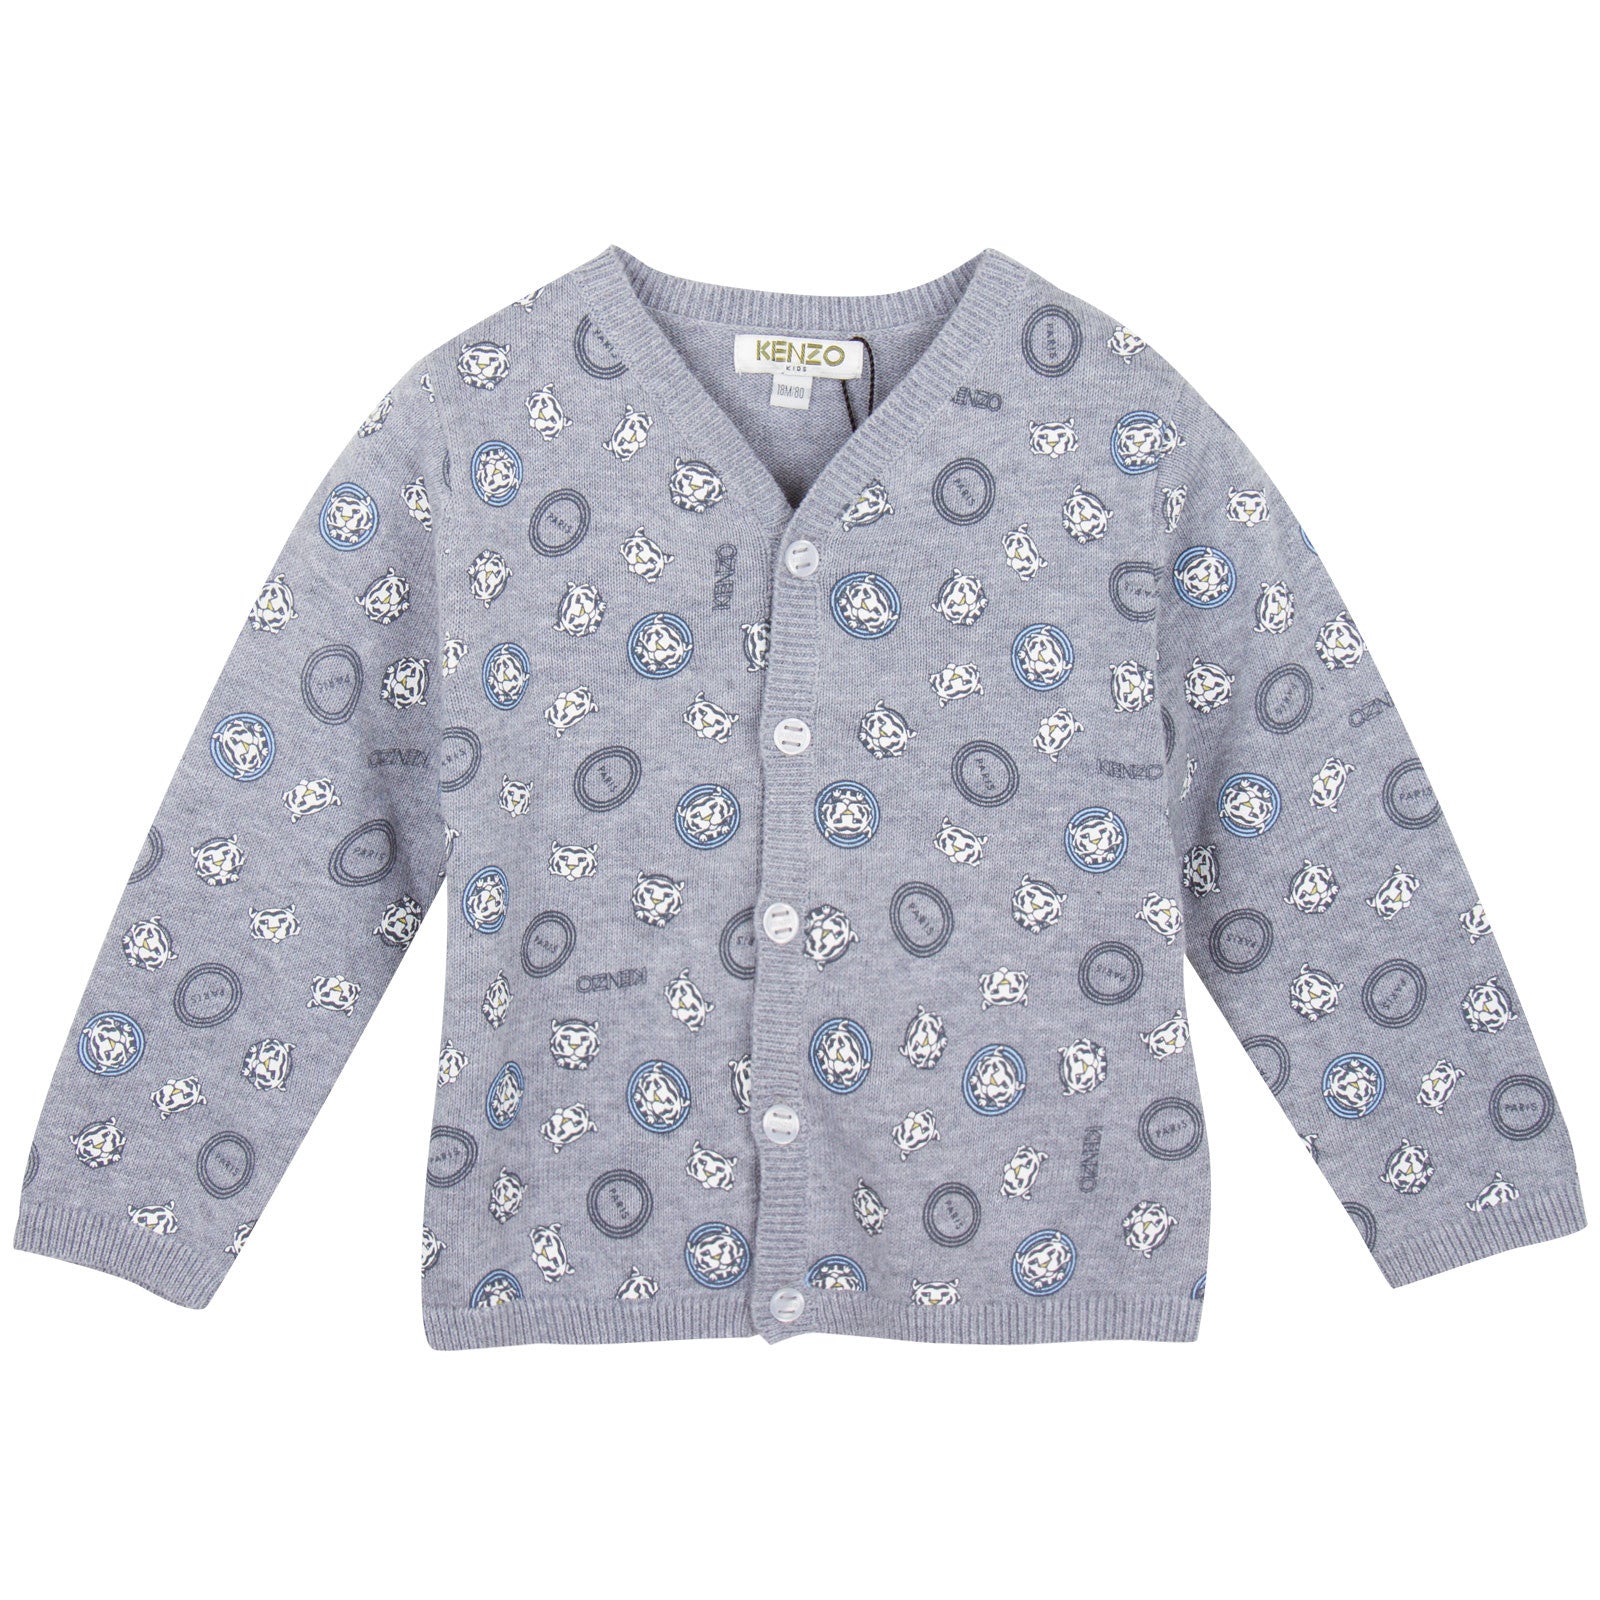 Baby Boys Grey Tiger Printed Cotton Knitted Cardigan - CÉMAROSE | Children's Fashion Store - 1